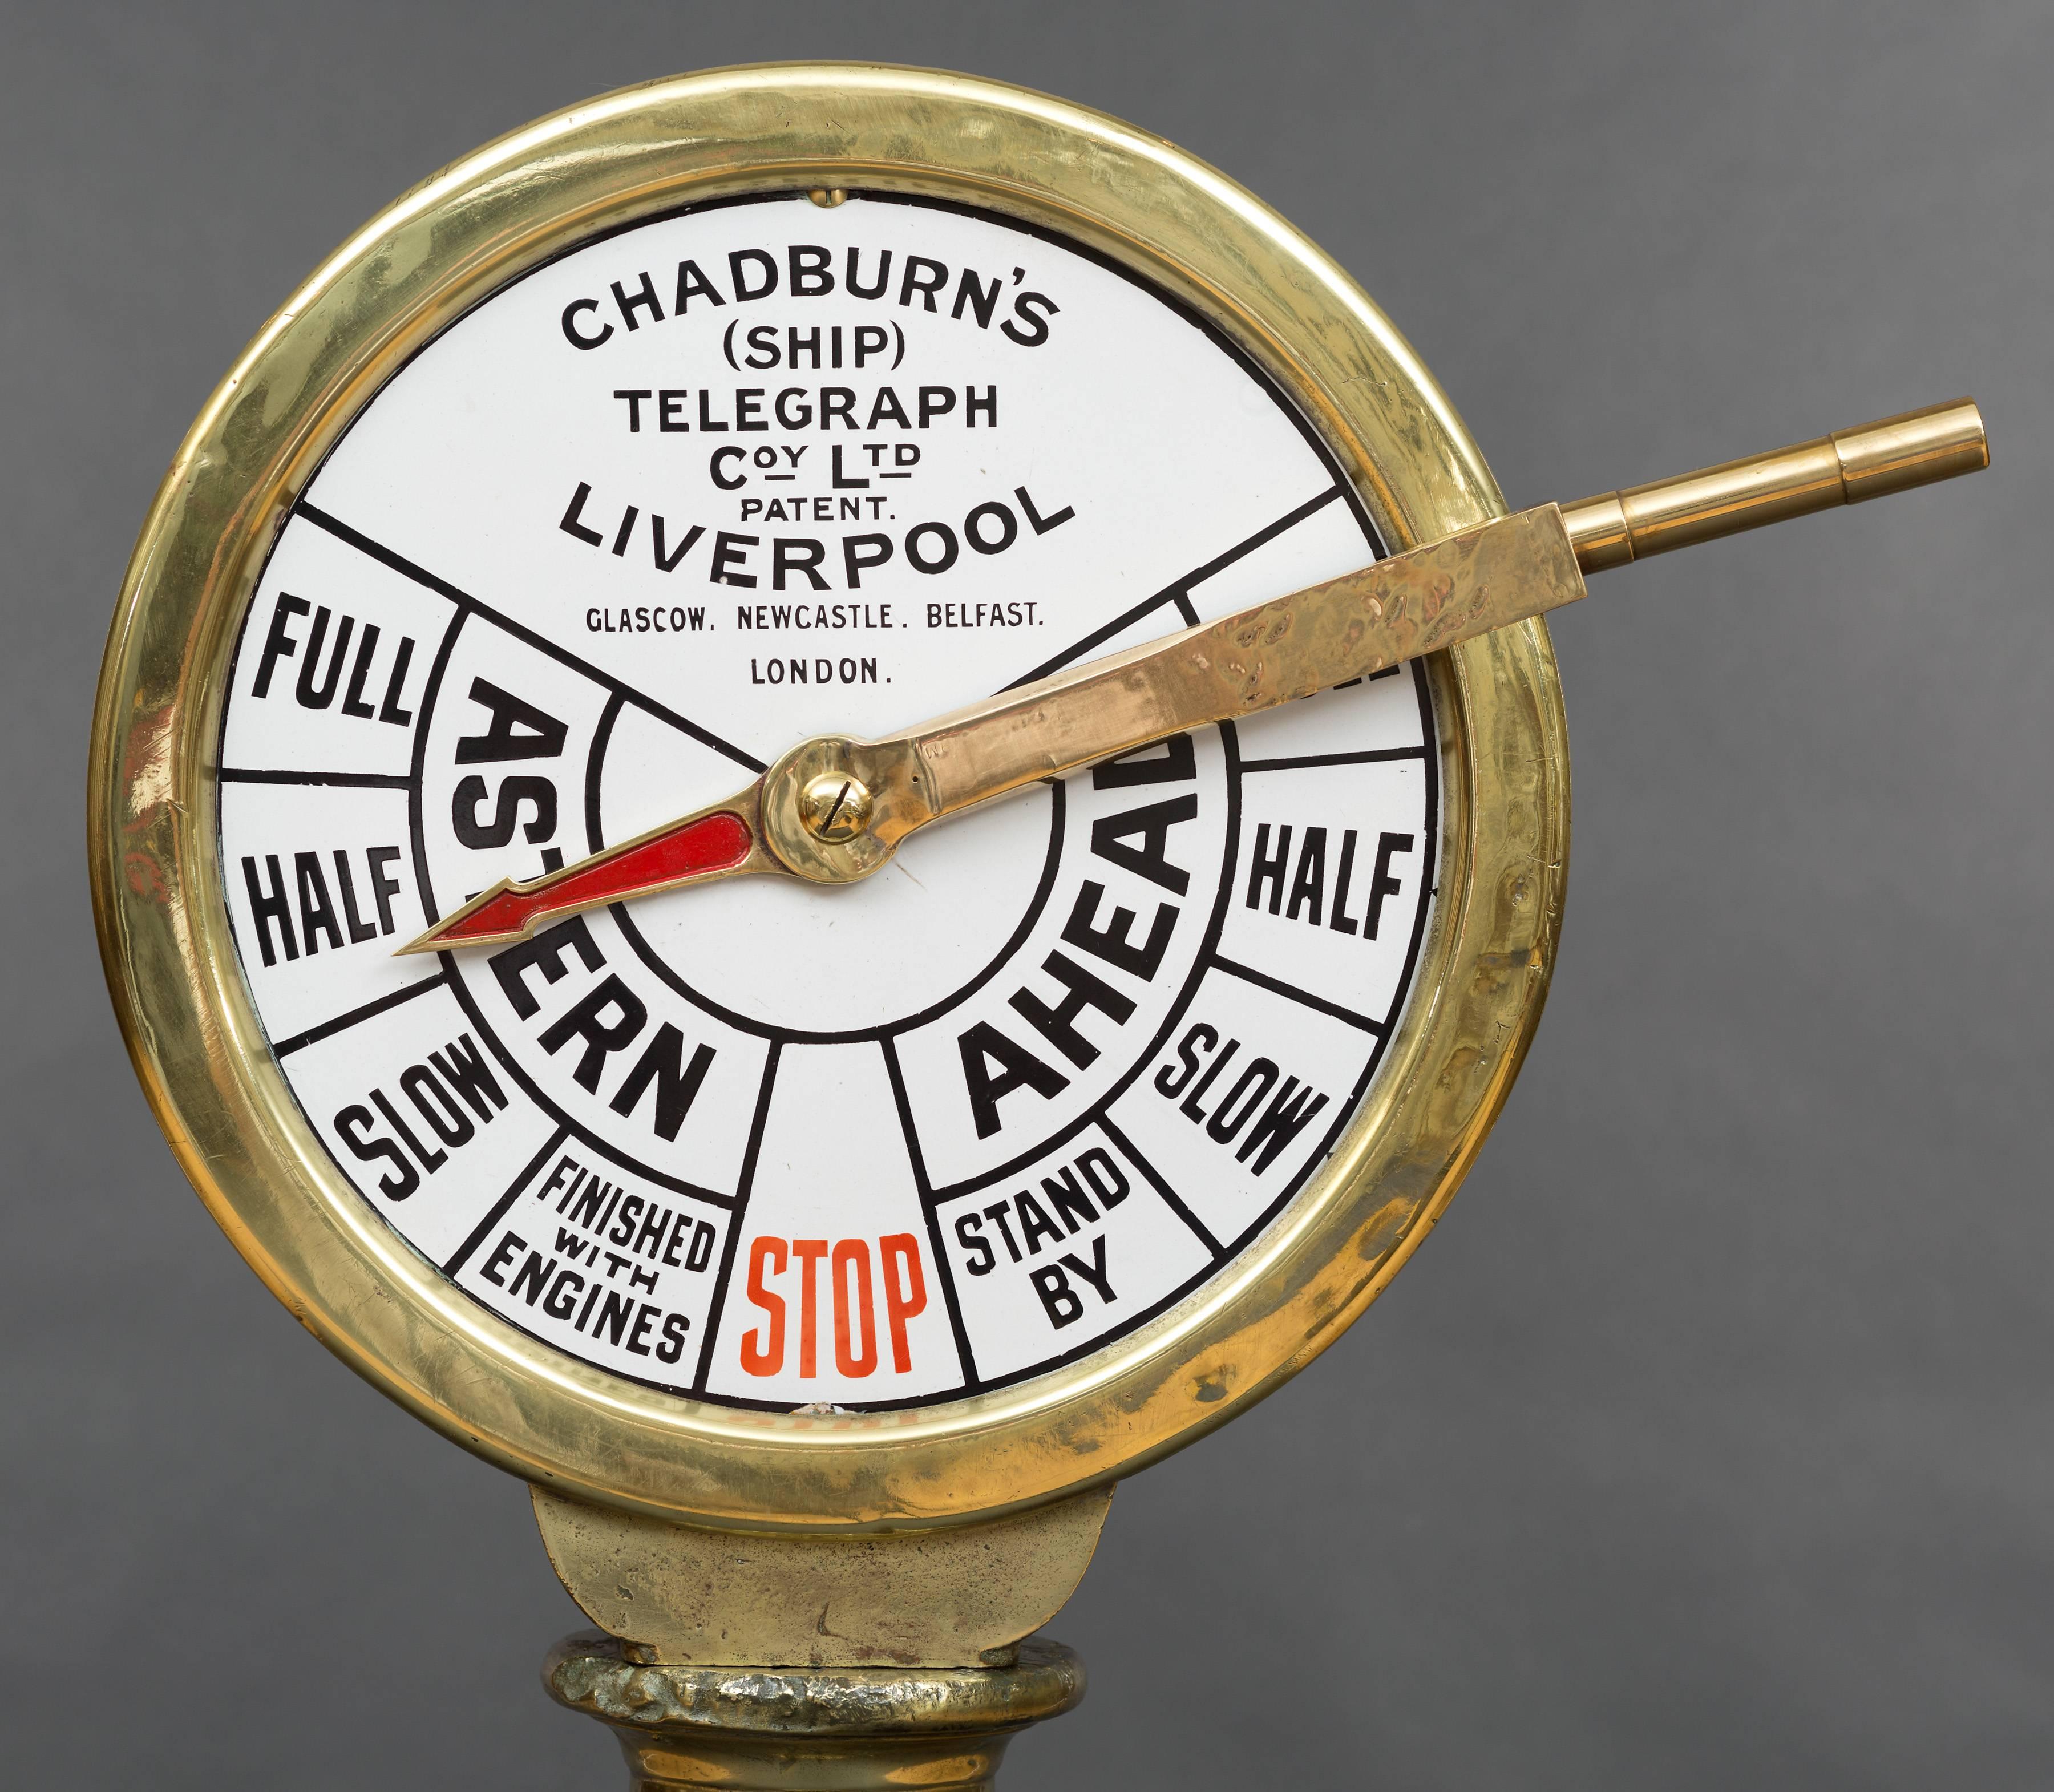 Ships telegraph.

Brass cased original ships telegraph with enamel dial signed ‘Chadburns (Ship) telegraph Coy Ltd. Patent Liverpool, Newcastle, Belfast, London.

Nine speed indicators with central pointer mounted on a mahogany